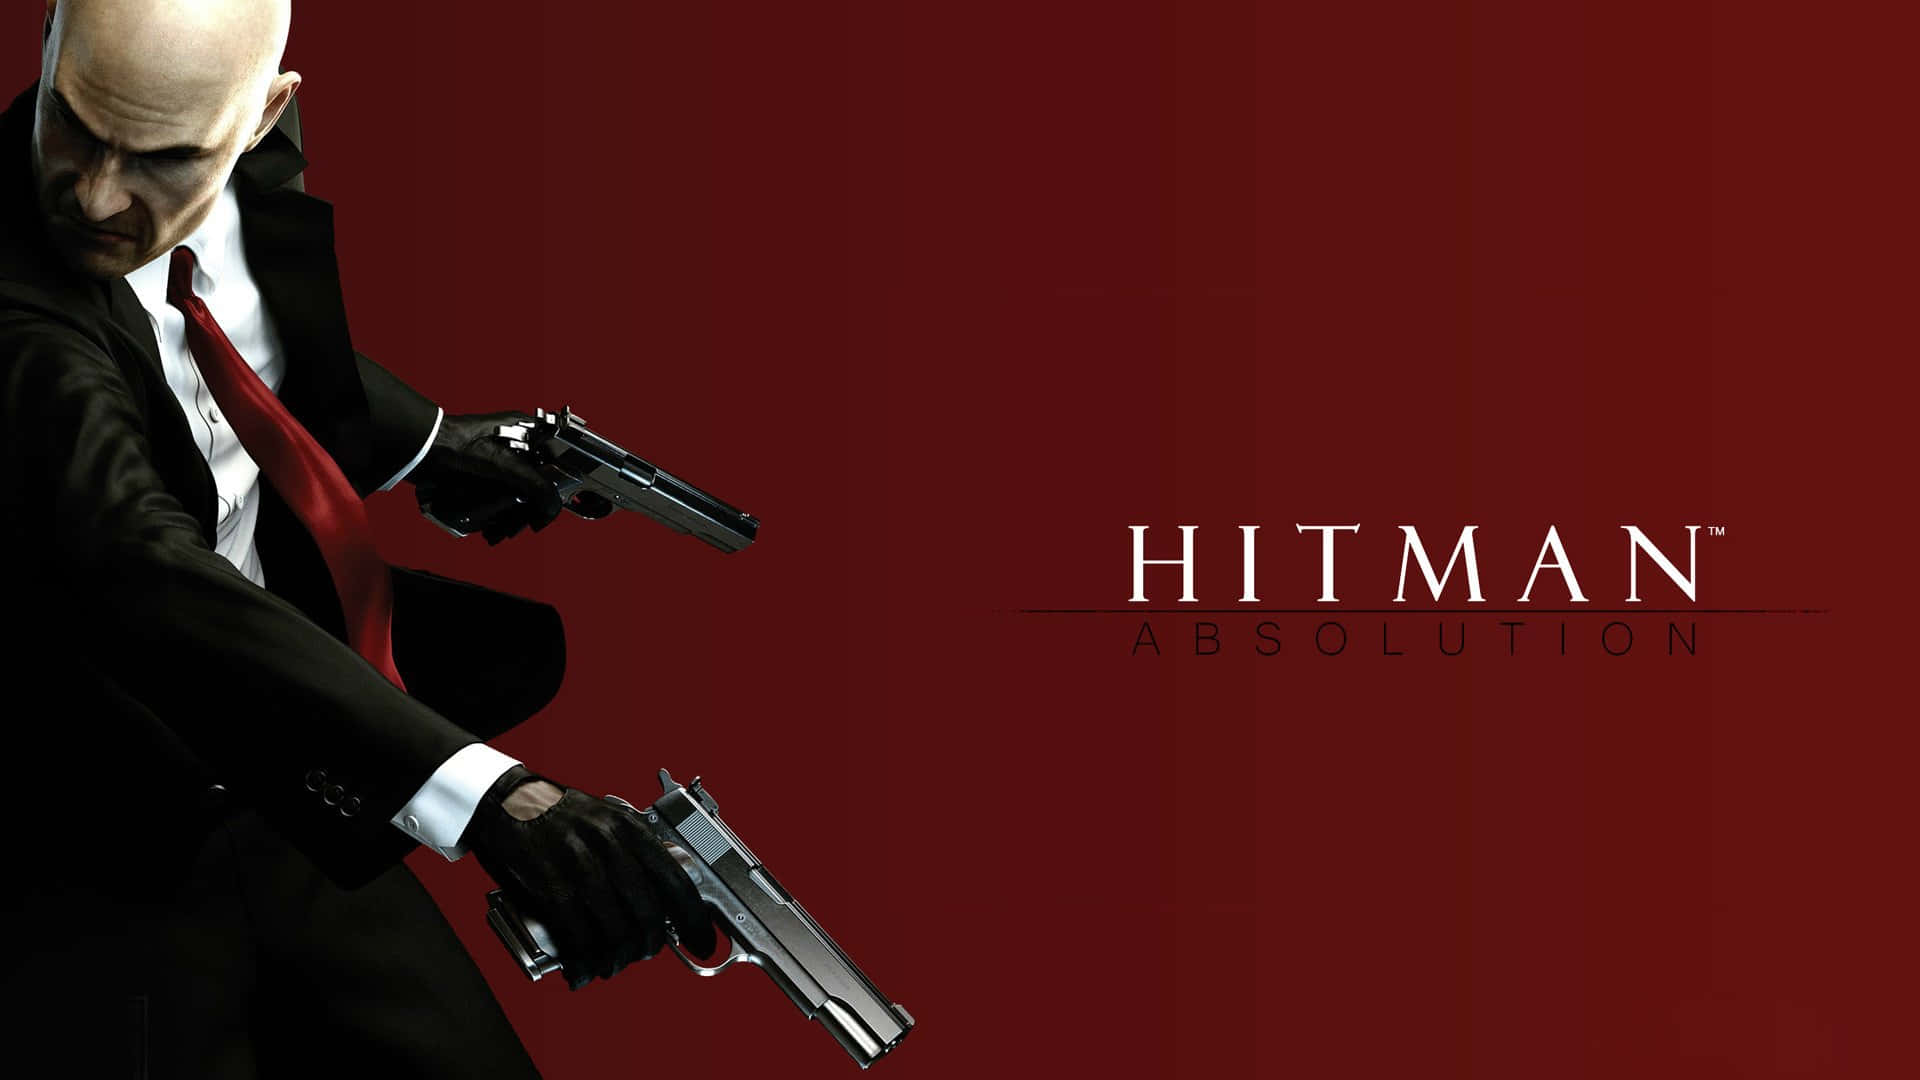 Image  Agent 47 in HD Hitman Absolution